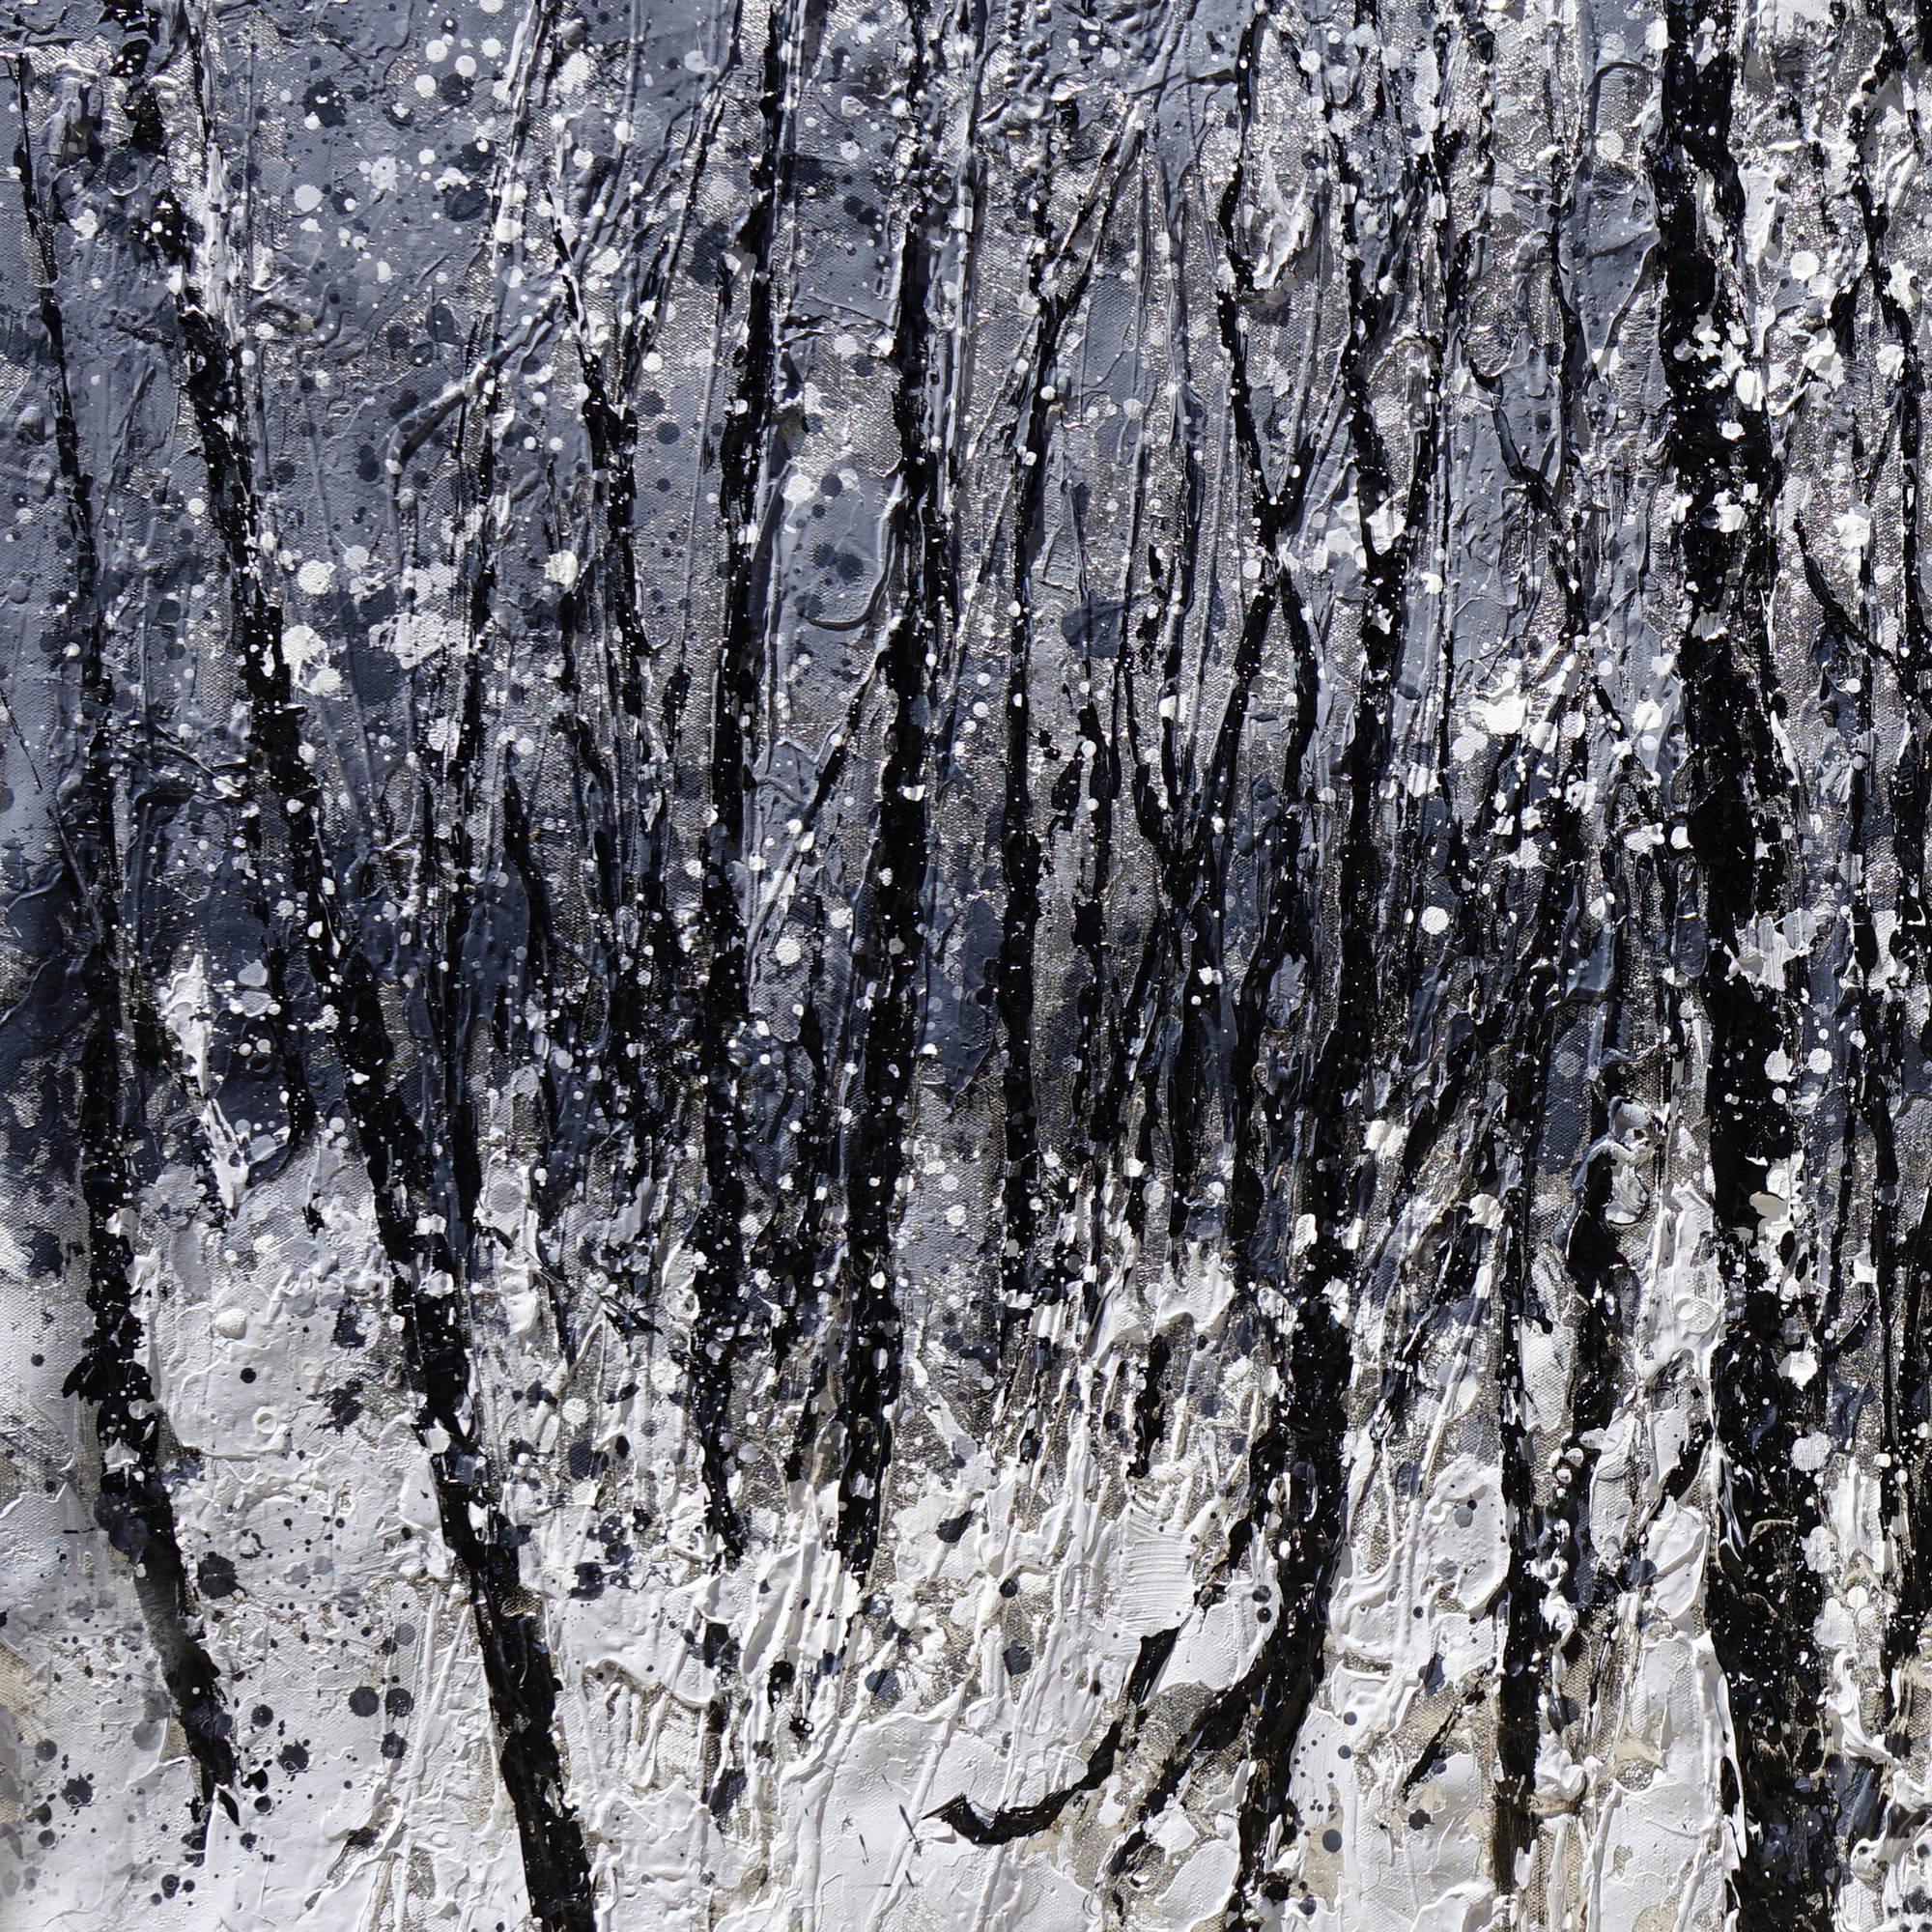 Hand painted Abstract Winter Forest 90x180cm